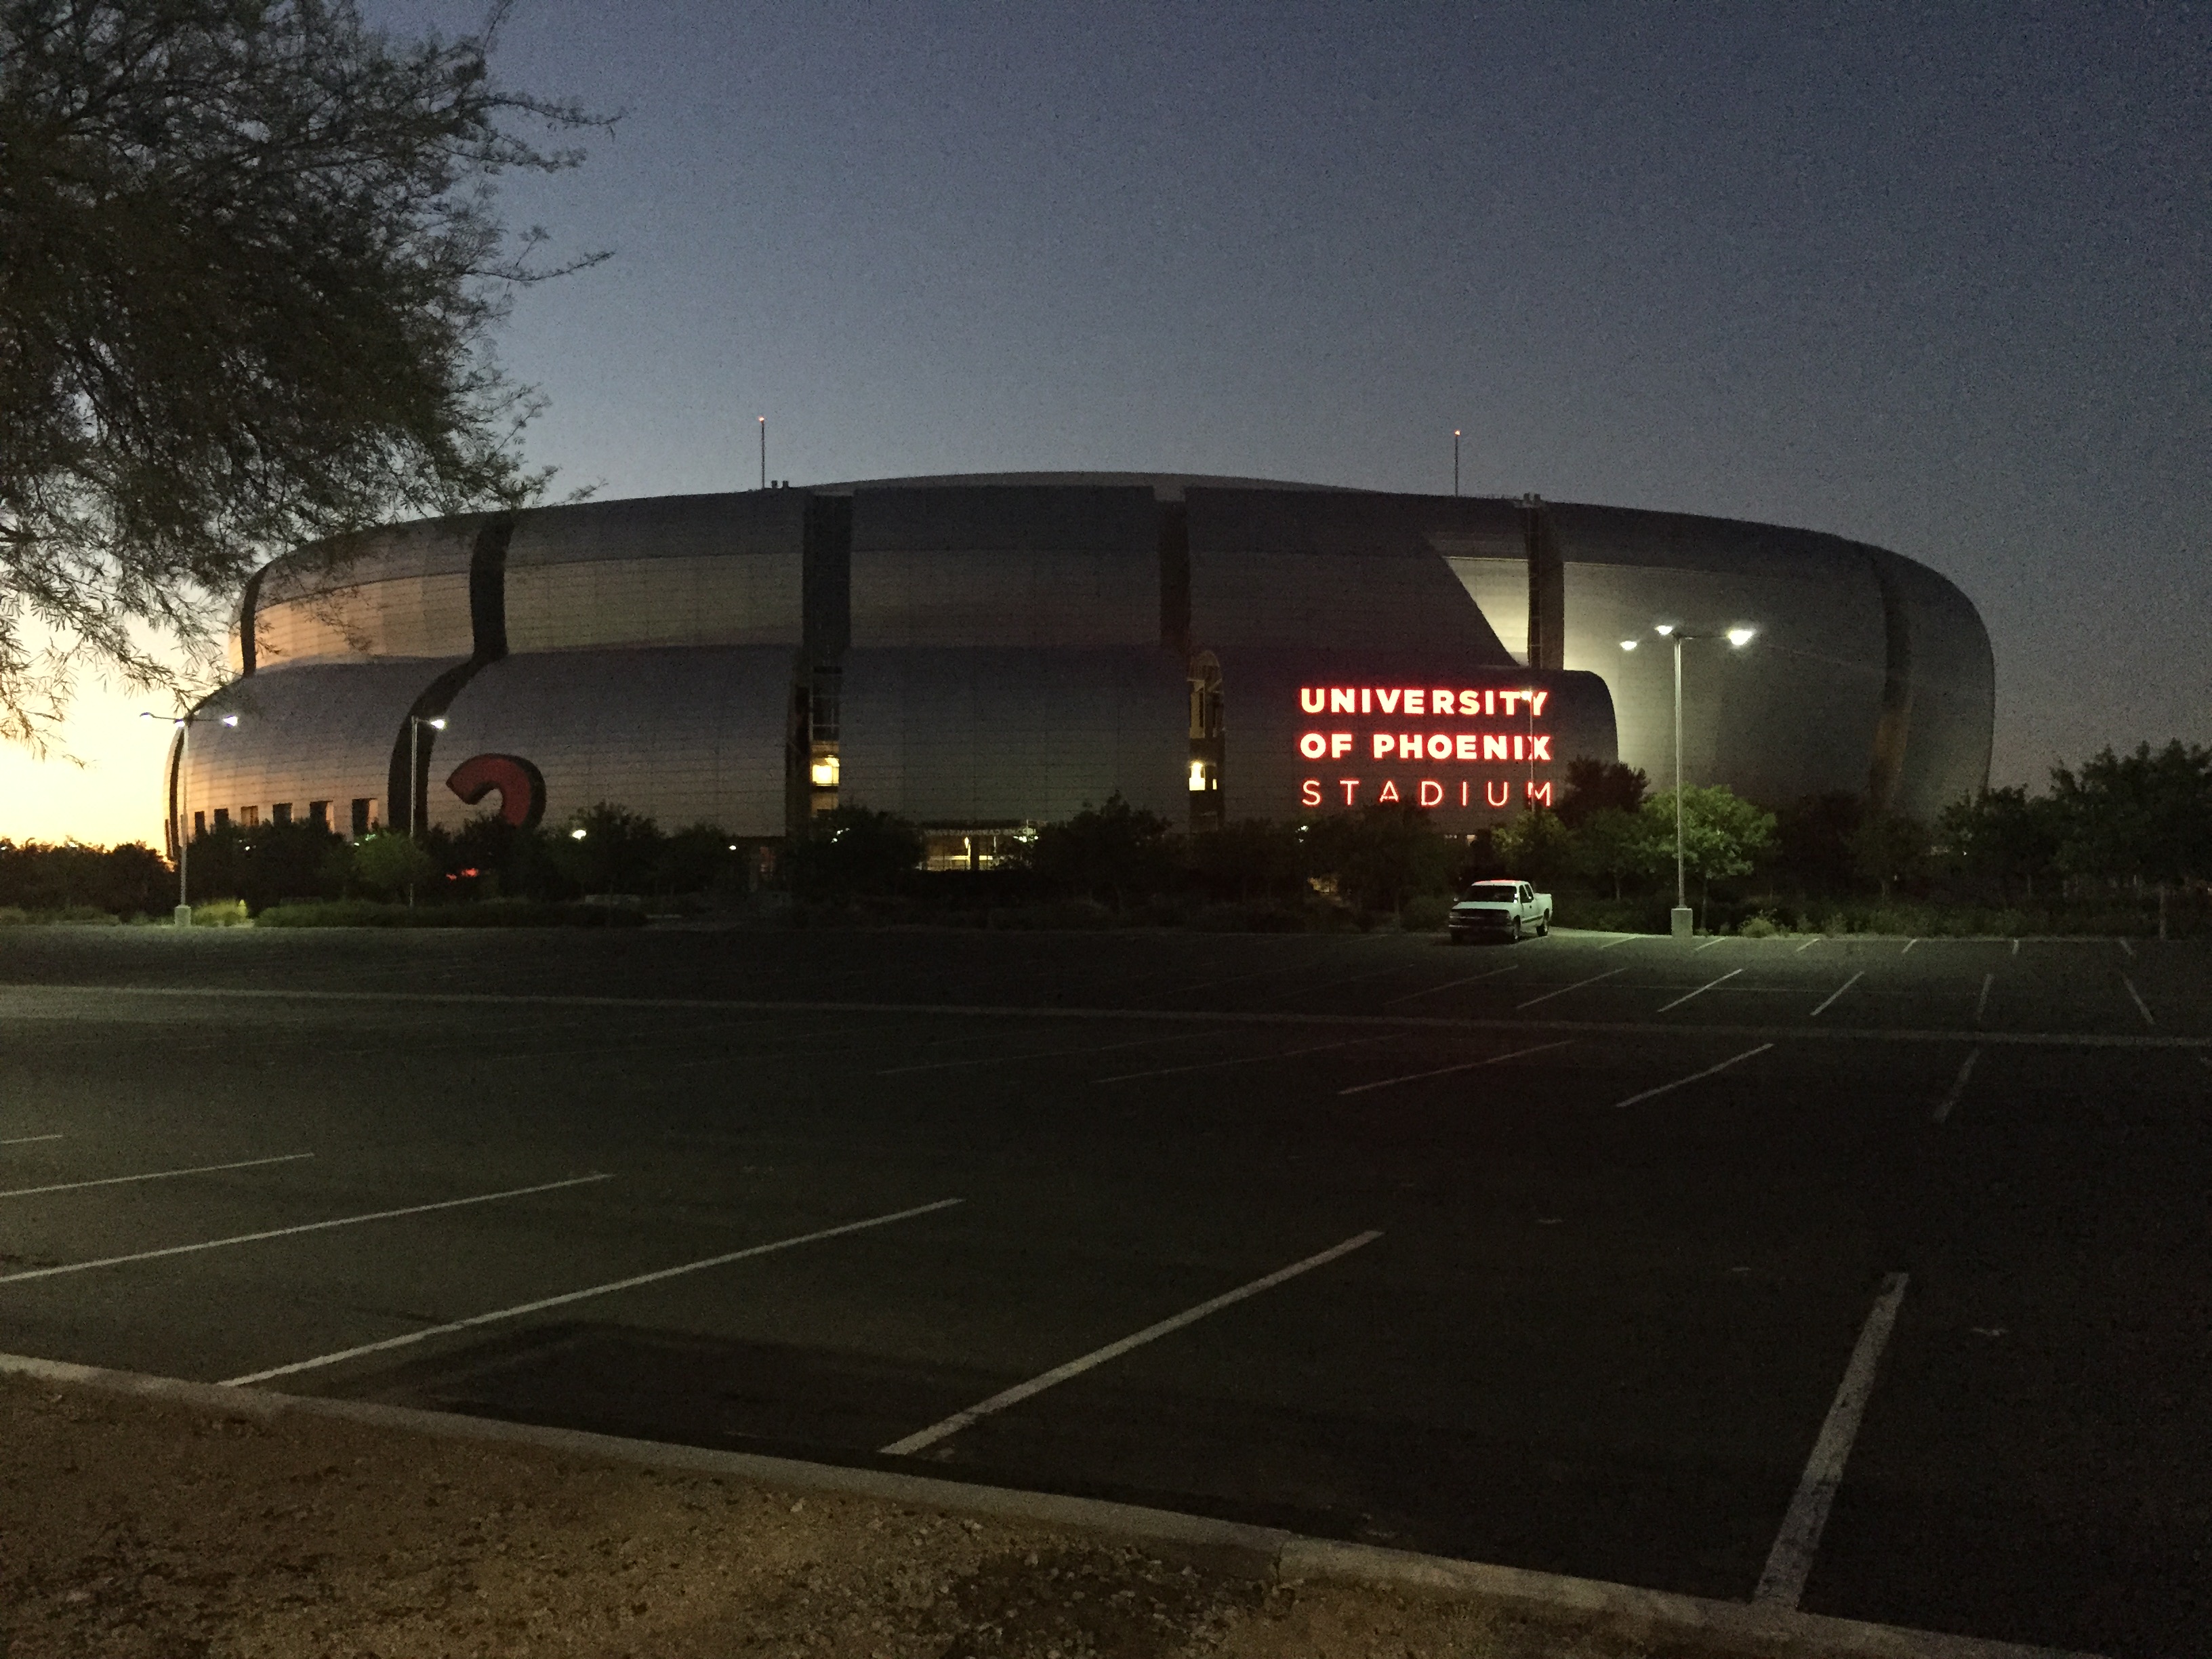 Heading to the Fiesta Bowl? Here's what you need to know.